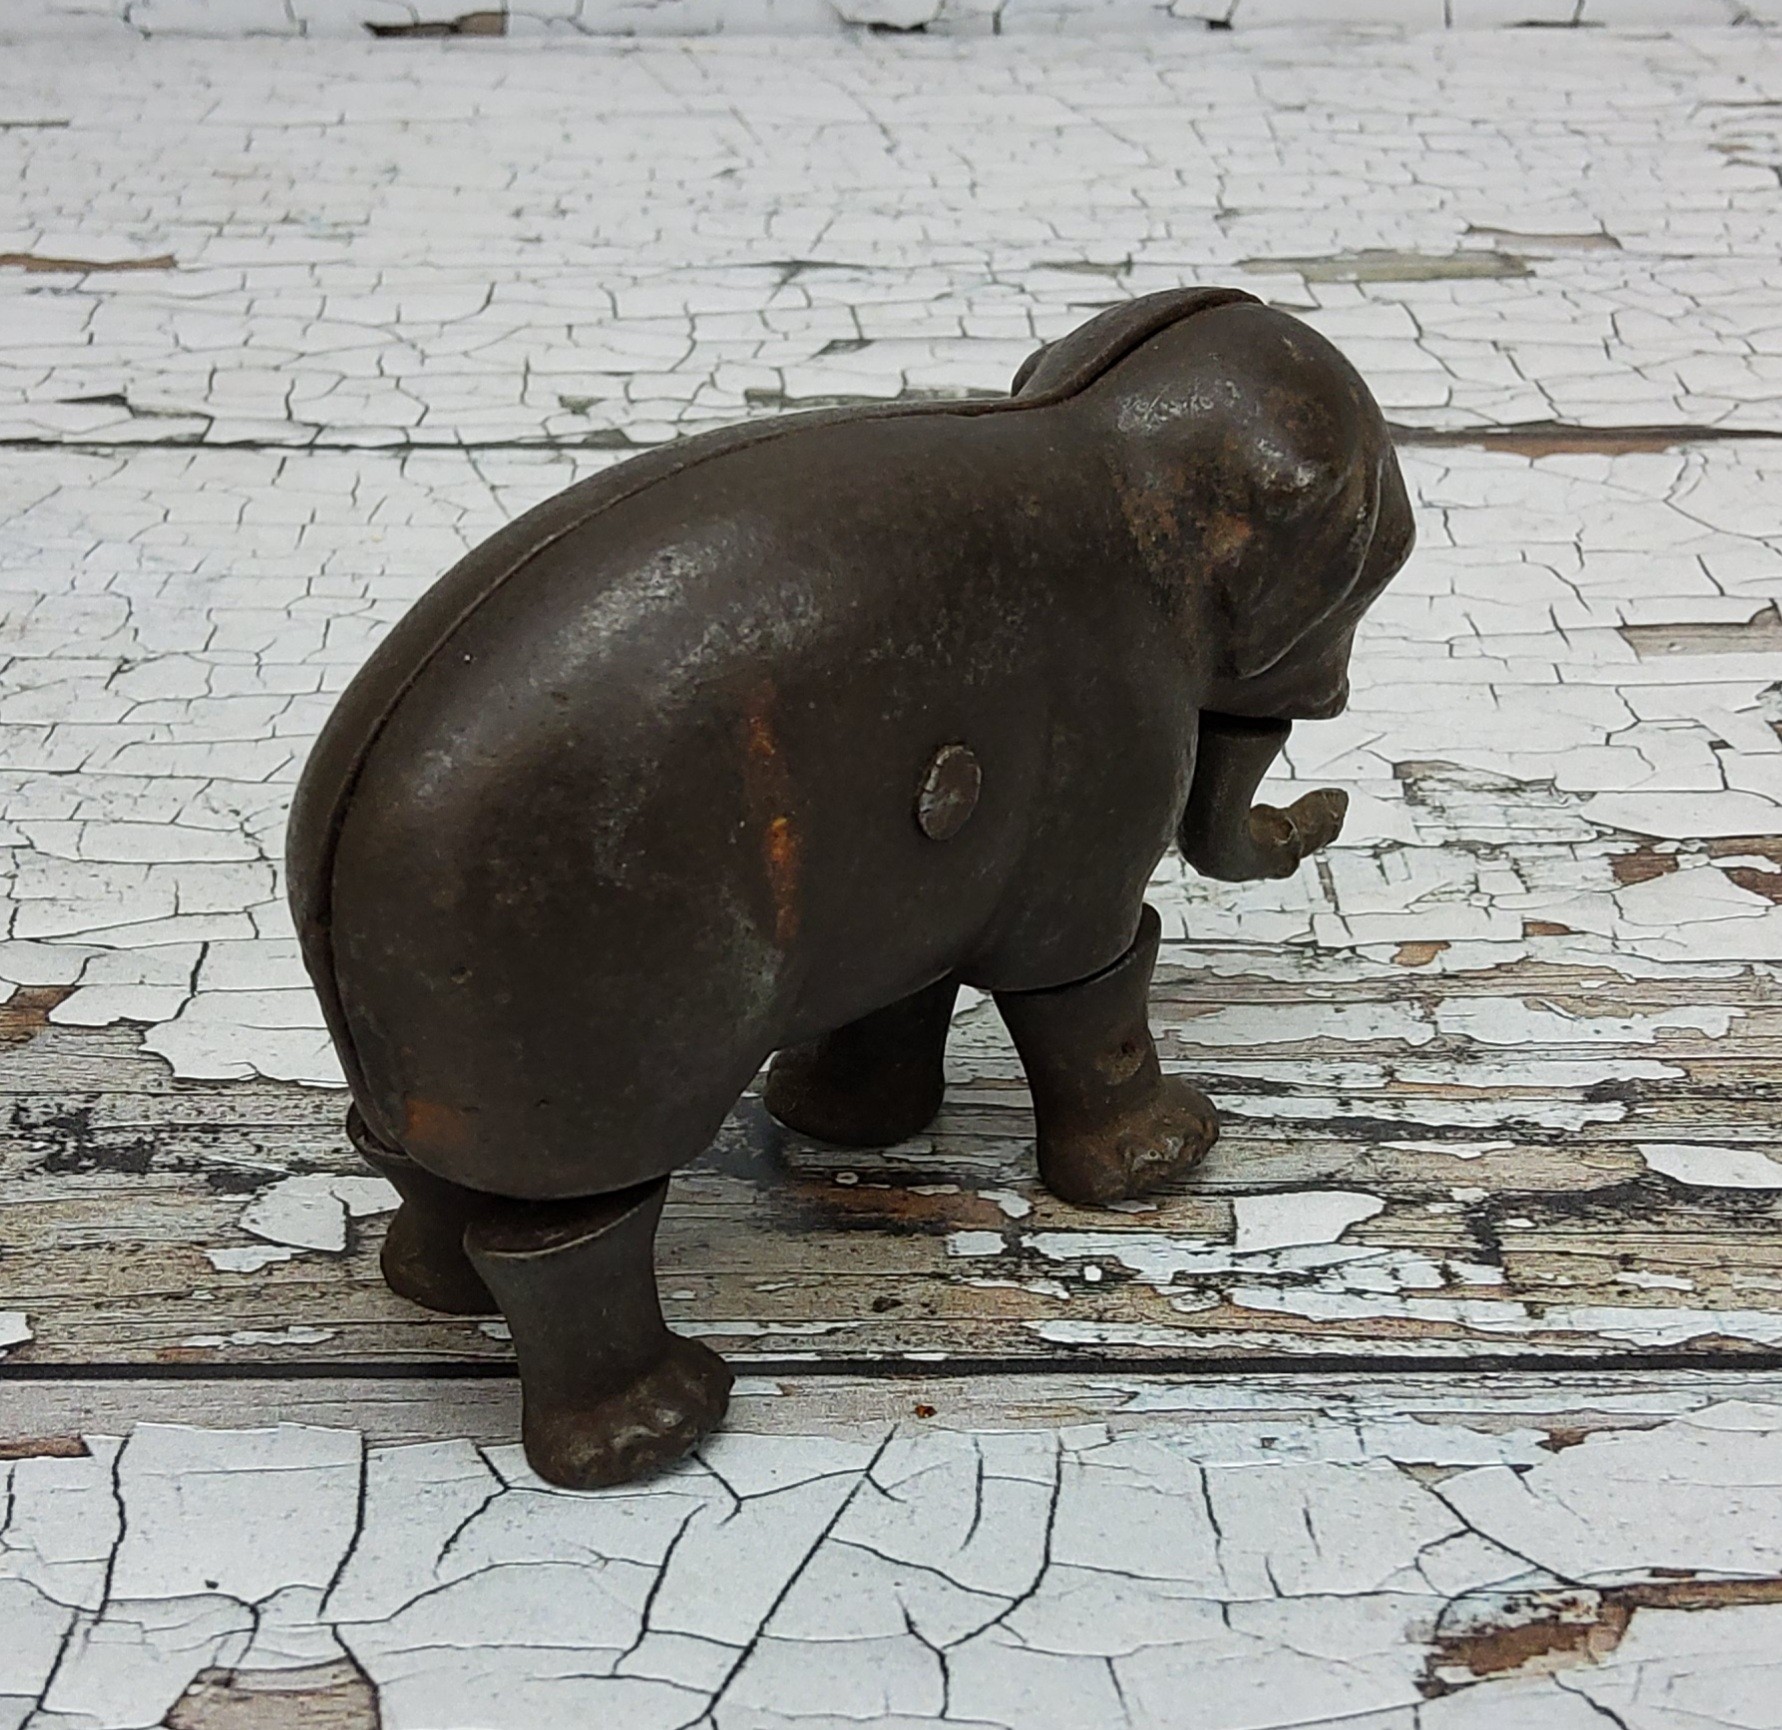 Late 19th Century Ives Toy Company, Bridgeport, Conneticut, cast iron ramp walking elephant toy, - Image 3 of 3